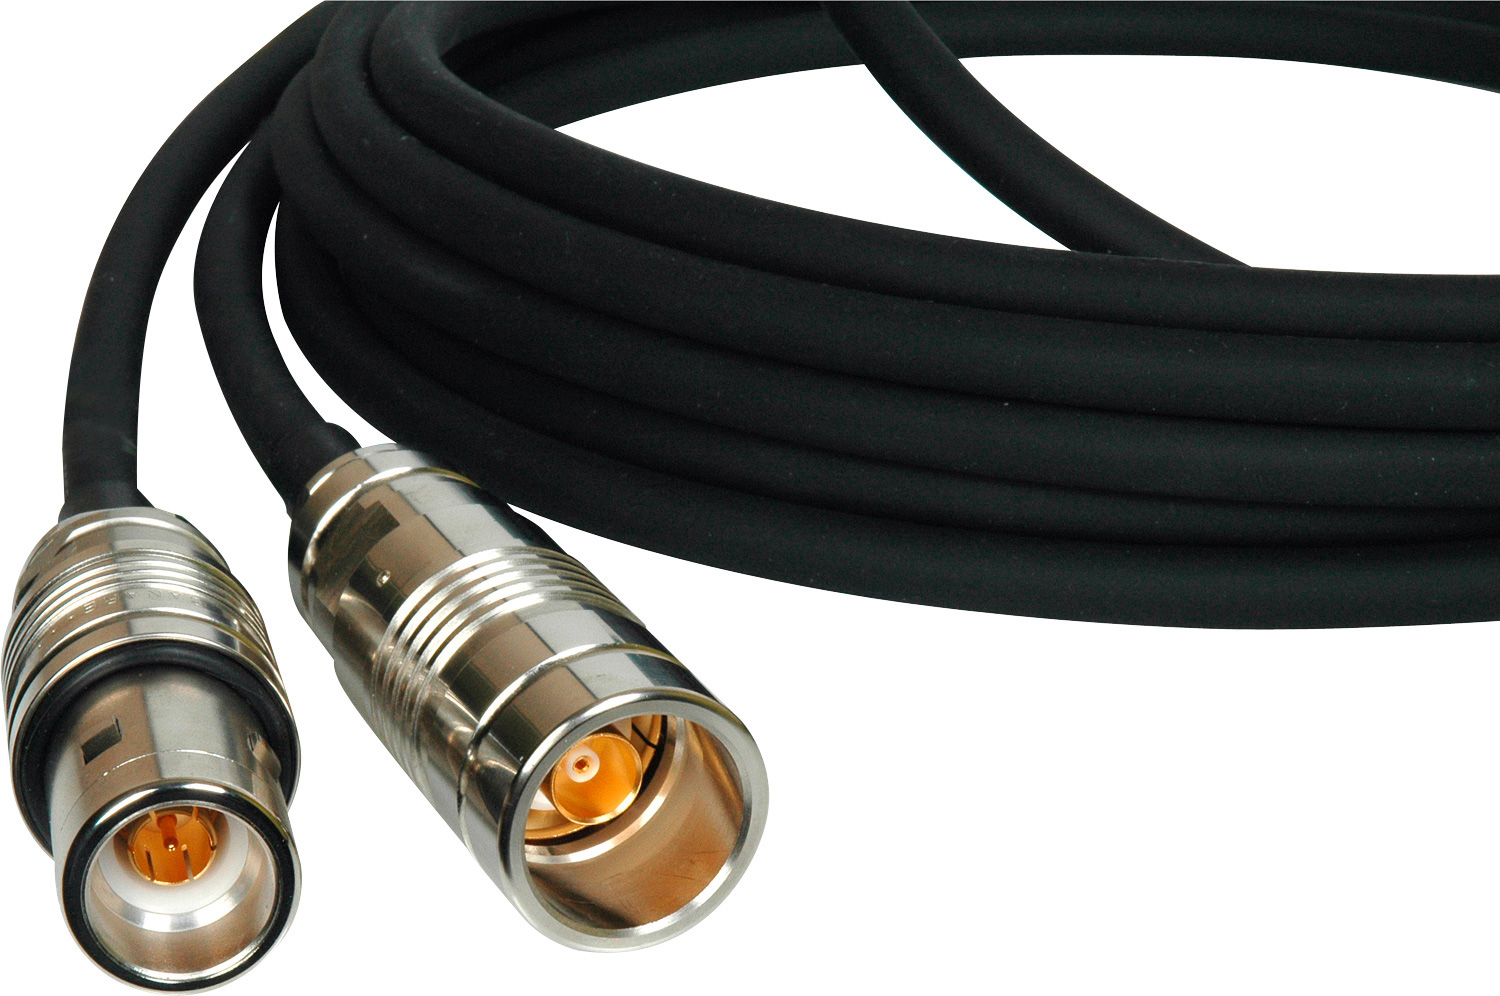 Laird TRI-1857A-500 Belden 1857A RG59/U Stranded Triax Male to Female Cable - 500 Foot